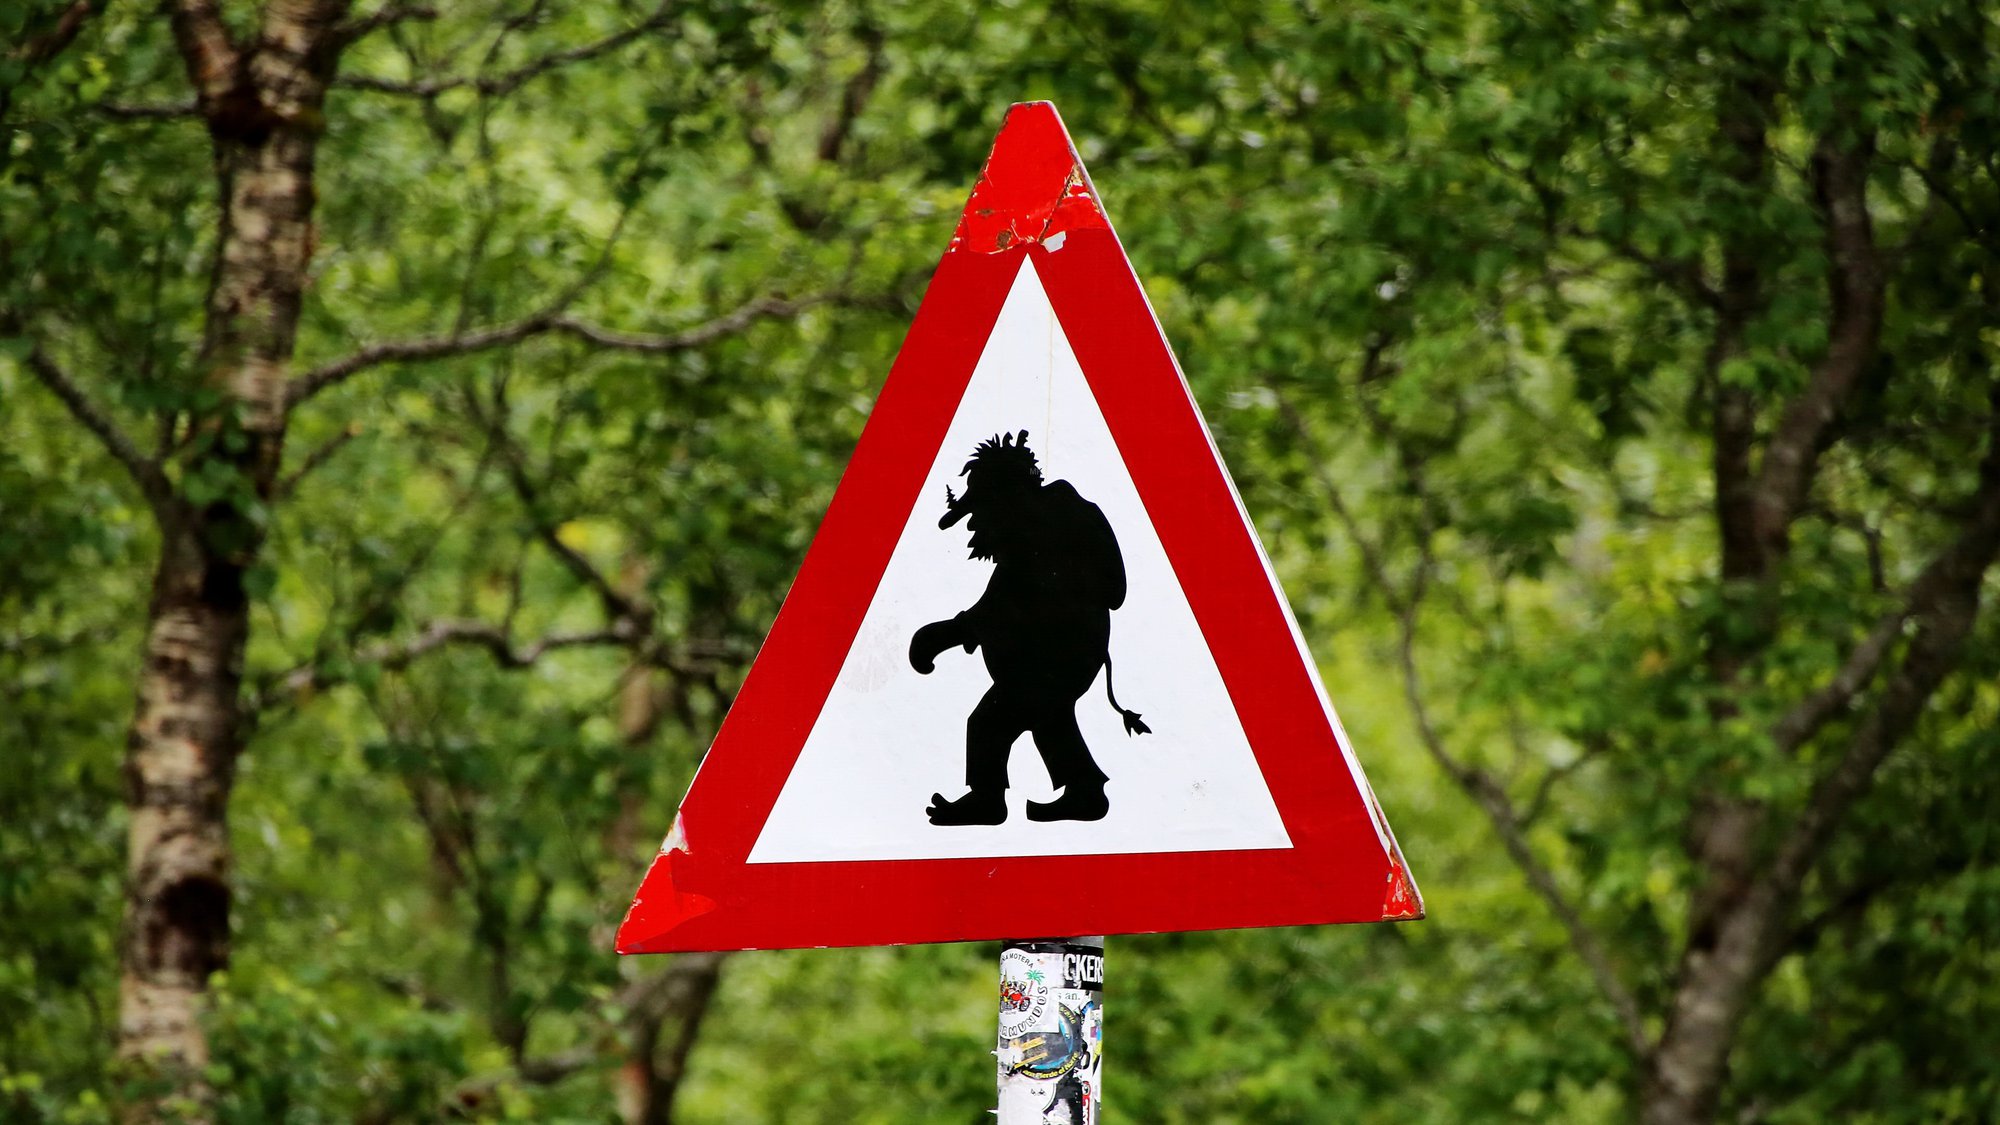 GNOME patent troll stripped of patent rights